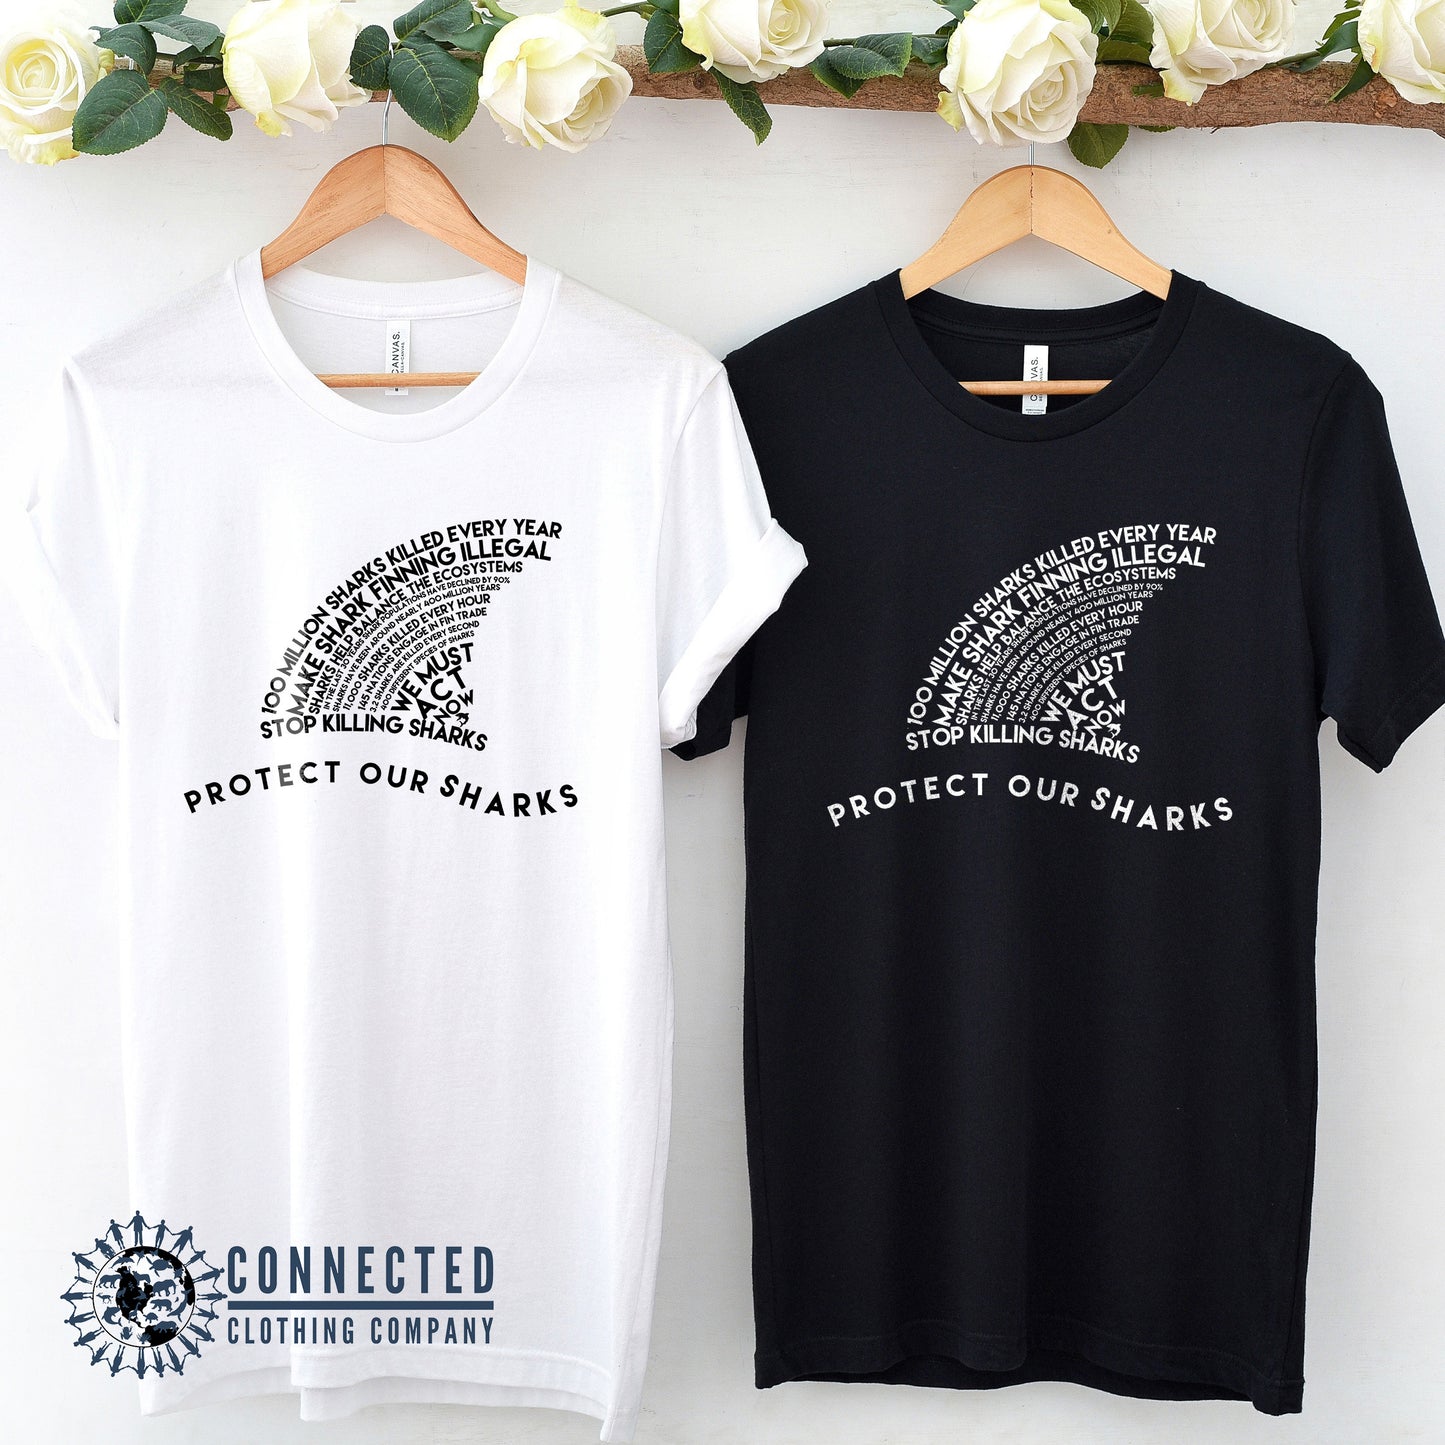 Black and White Protect Our Sharks Short-Sleeve Tees - getpinkfit - Ethically and Sustainably Made - 10% of profits donated to shark conservation and ocean conservation